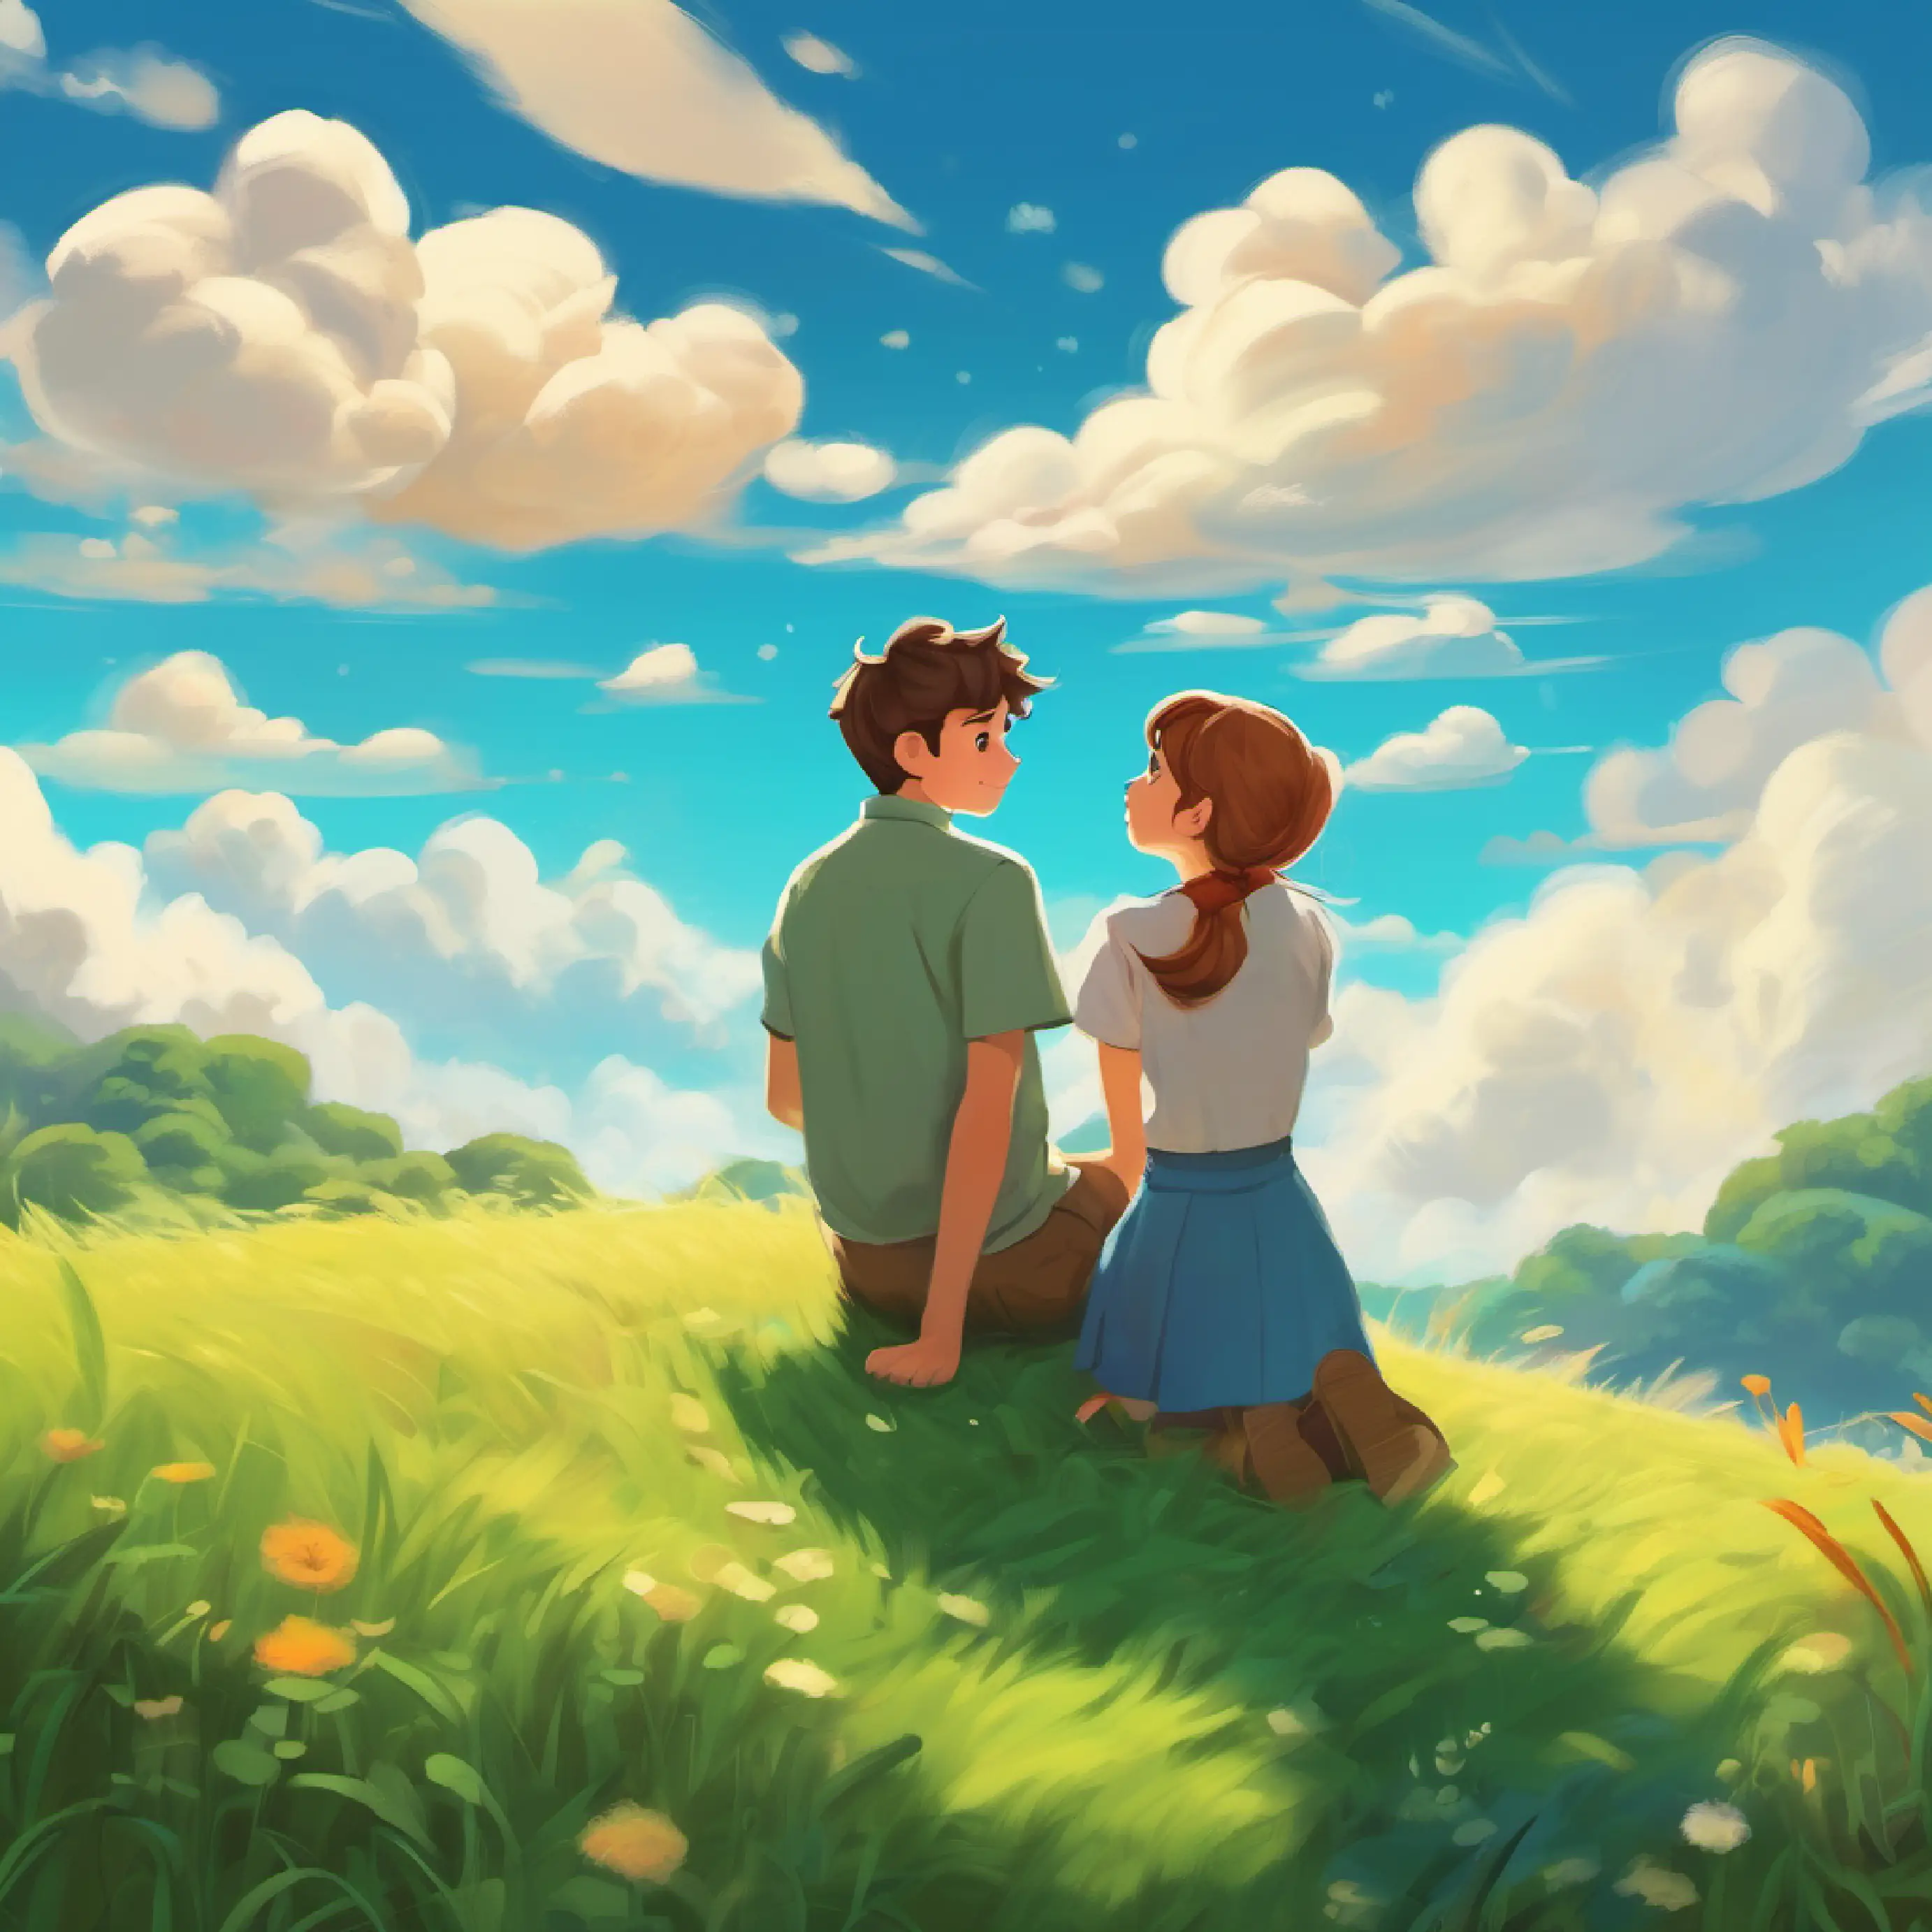 Counting clouds, Amy and Lucas lay on the grass, whispering numbers.